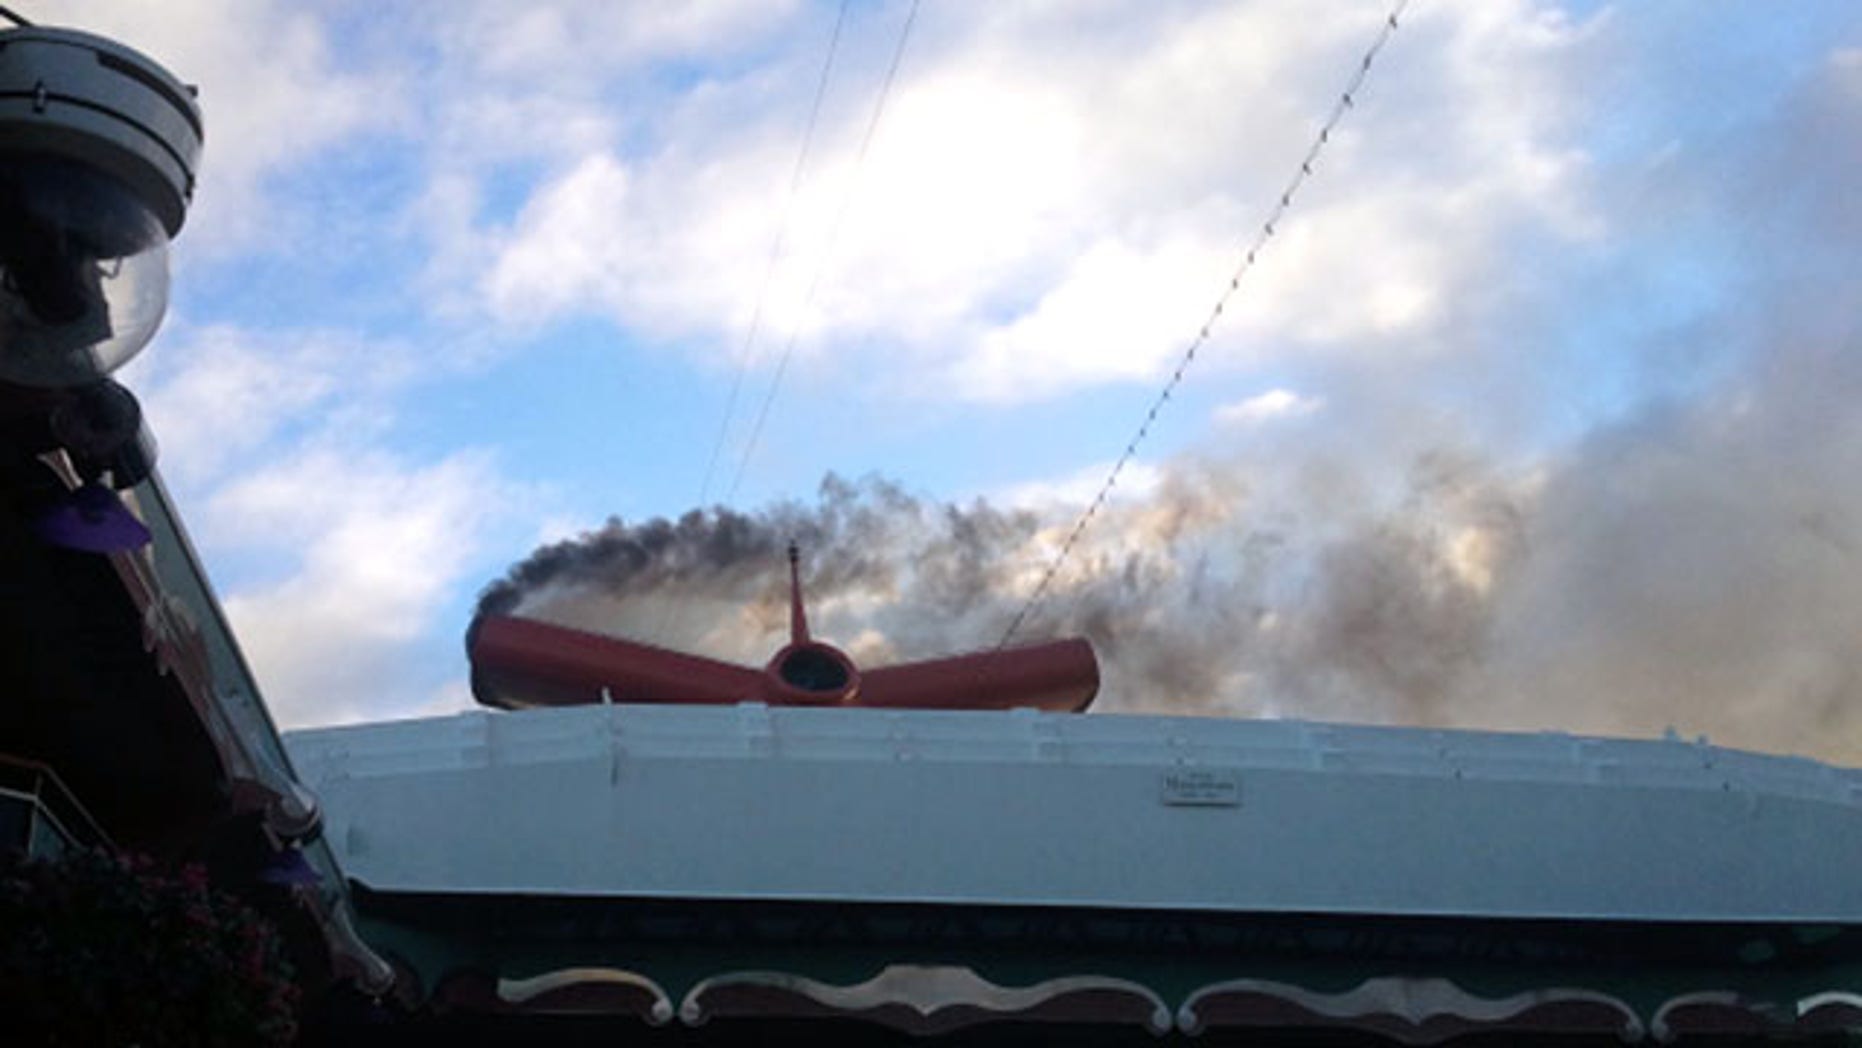 cruise ship engine on fire